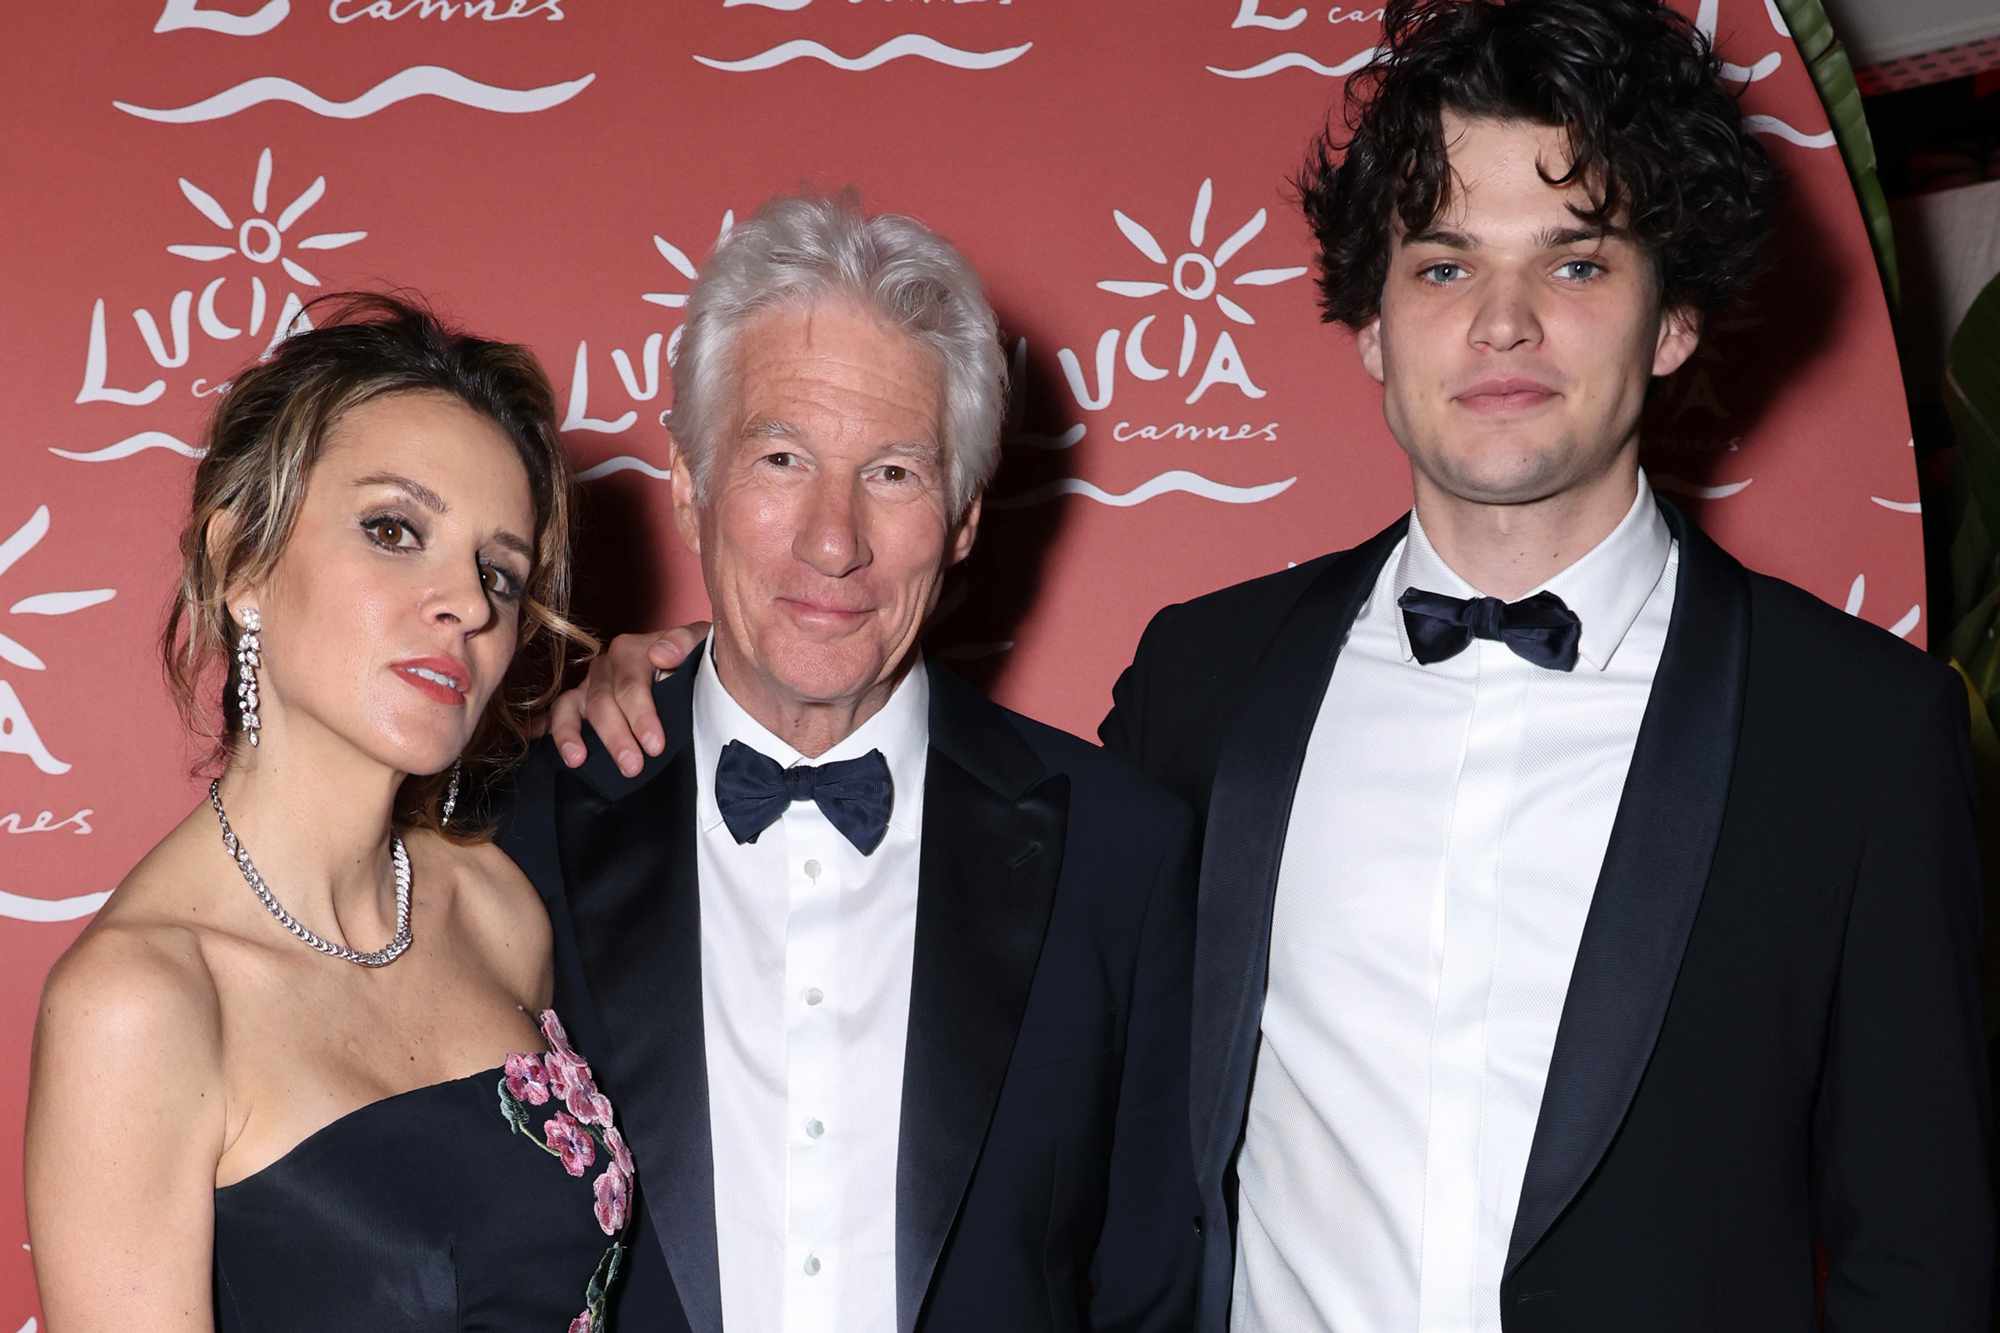 Richard Gere Steps Out with Son Homer and Wife Alejandra Silva at Cannes Film Festival Afterparty